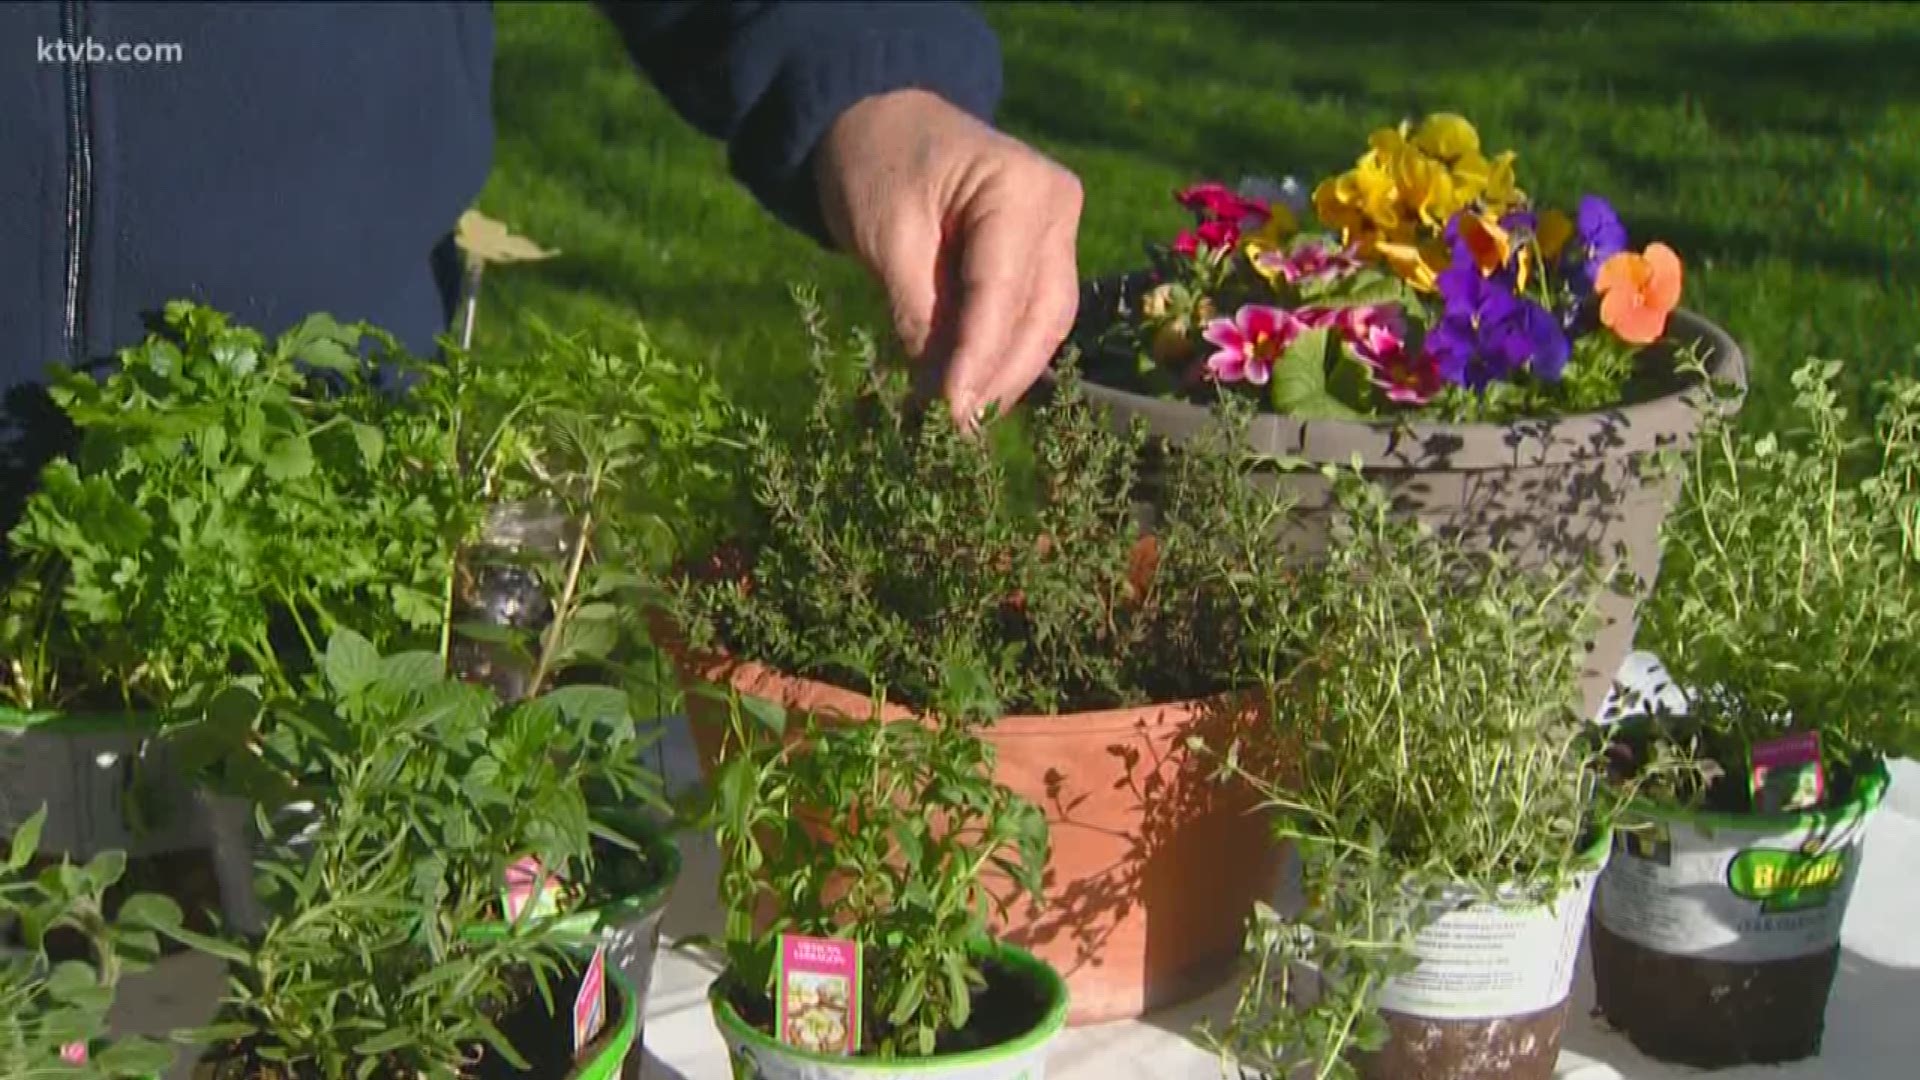 Garden master Jim Duthie shows us some of the popular herbs that you'll want to include in your garden.